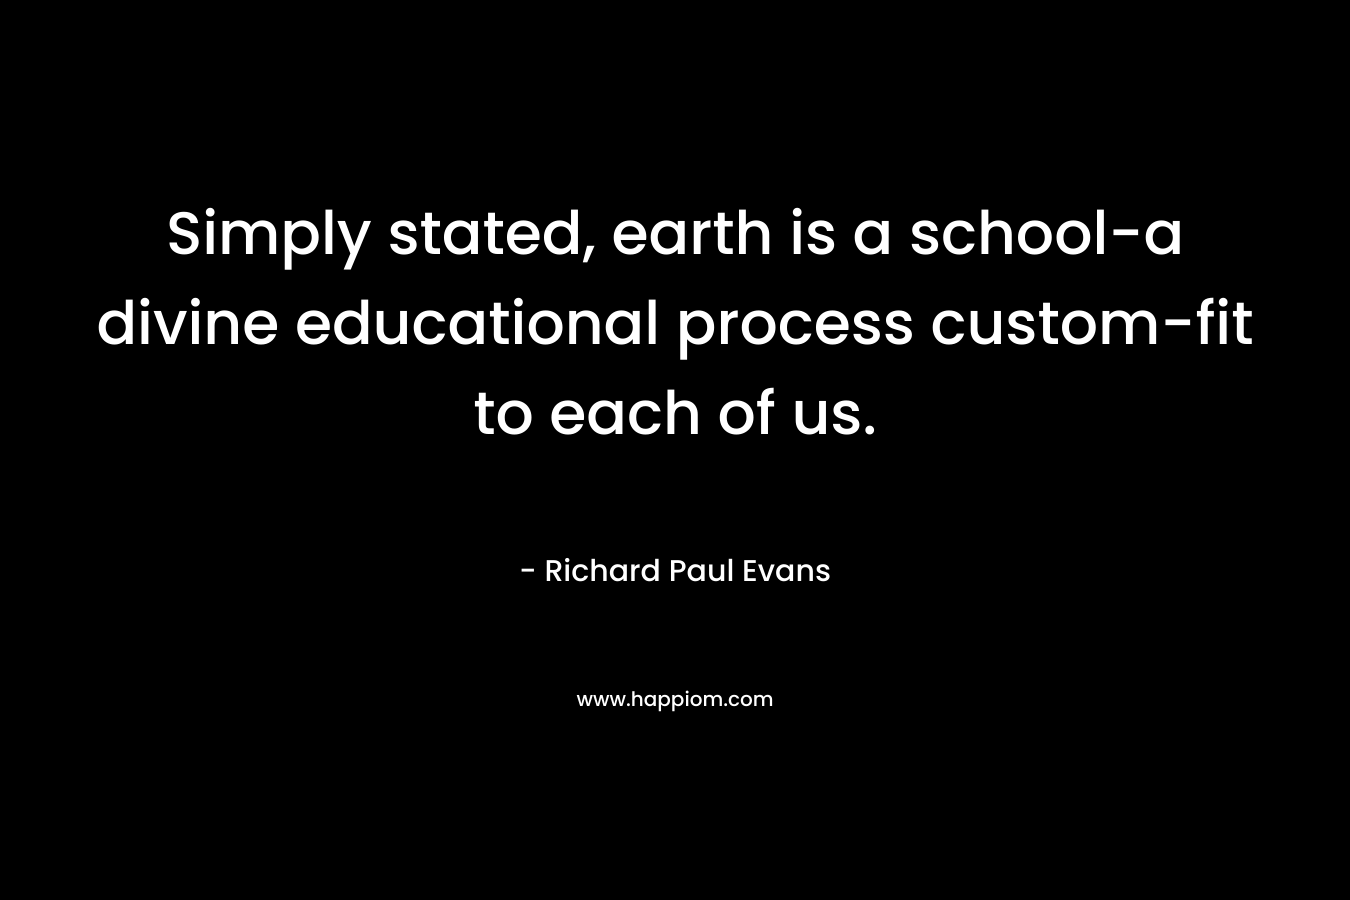 Simply stated, earth is a school-a divine educational process custom-fit to each of us.